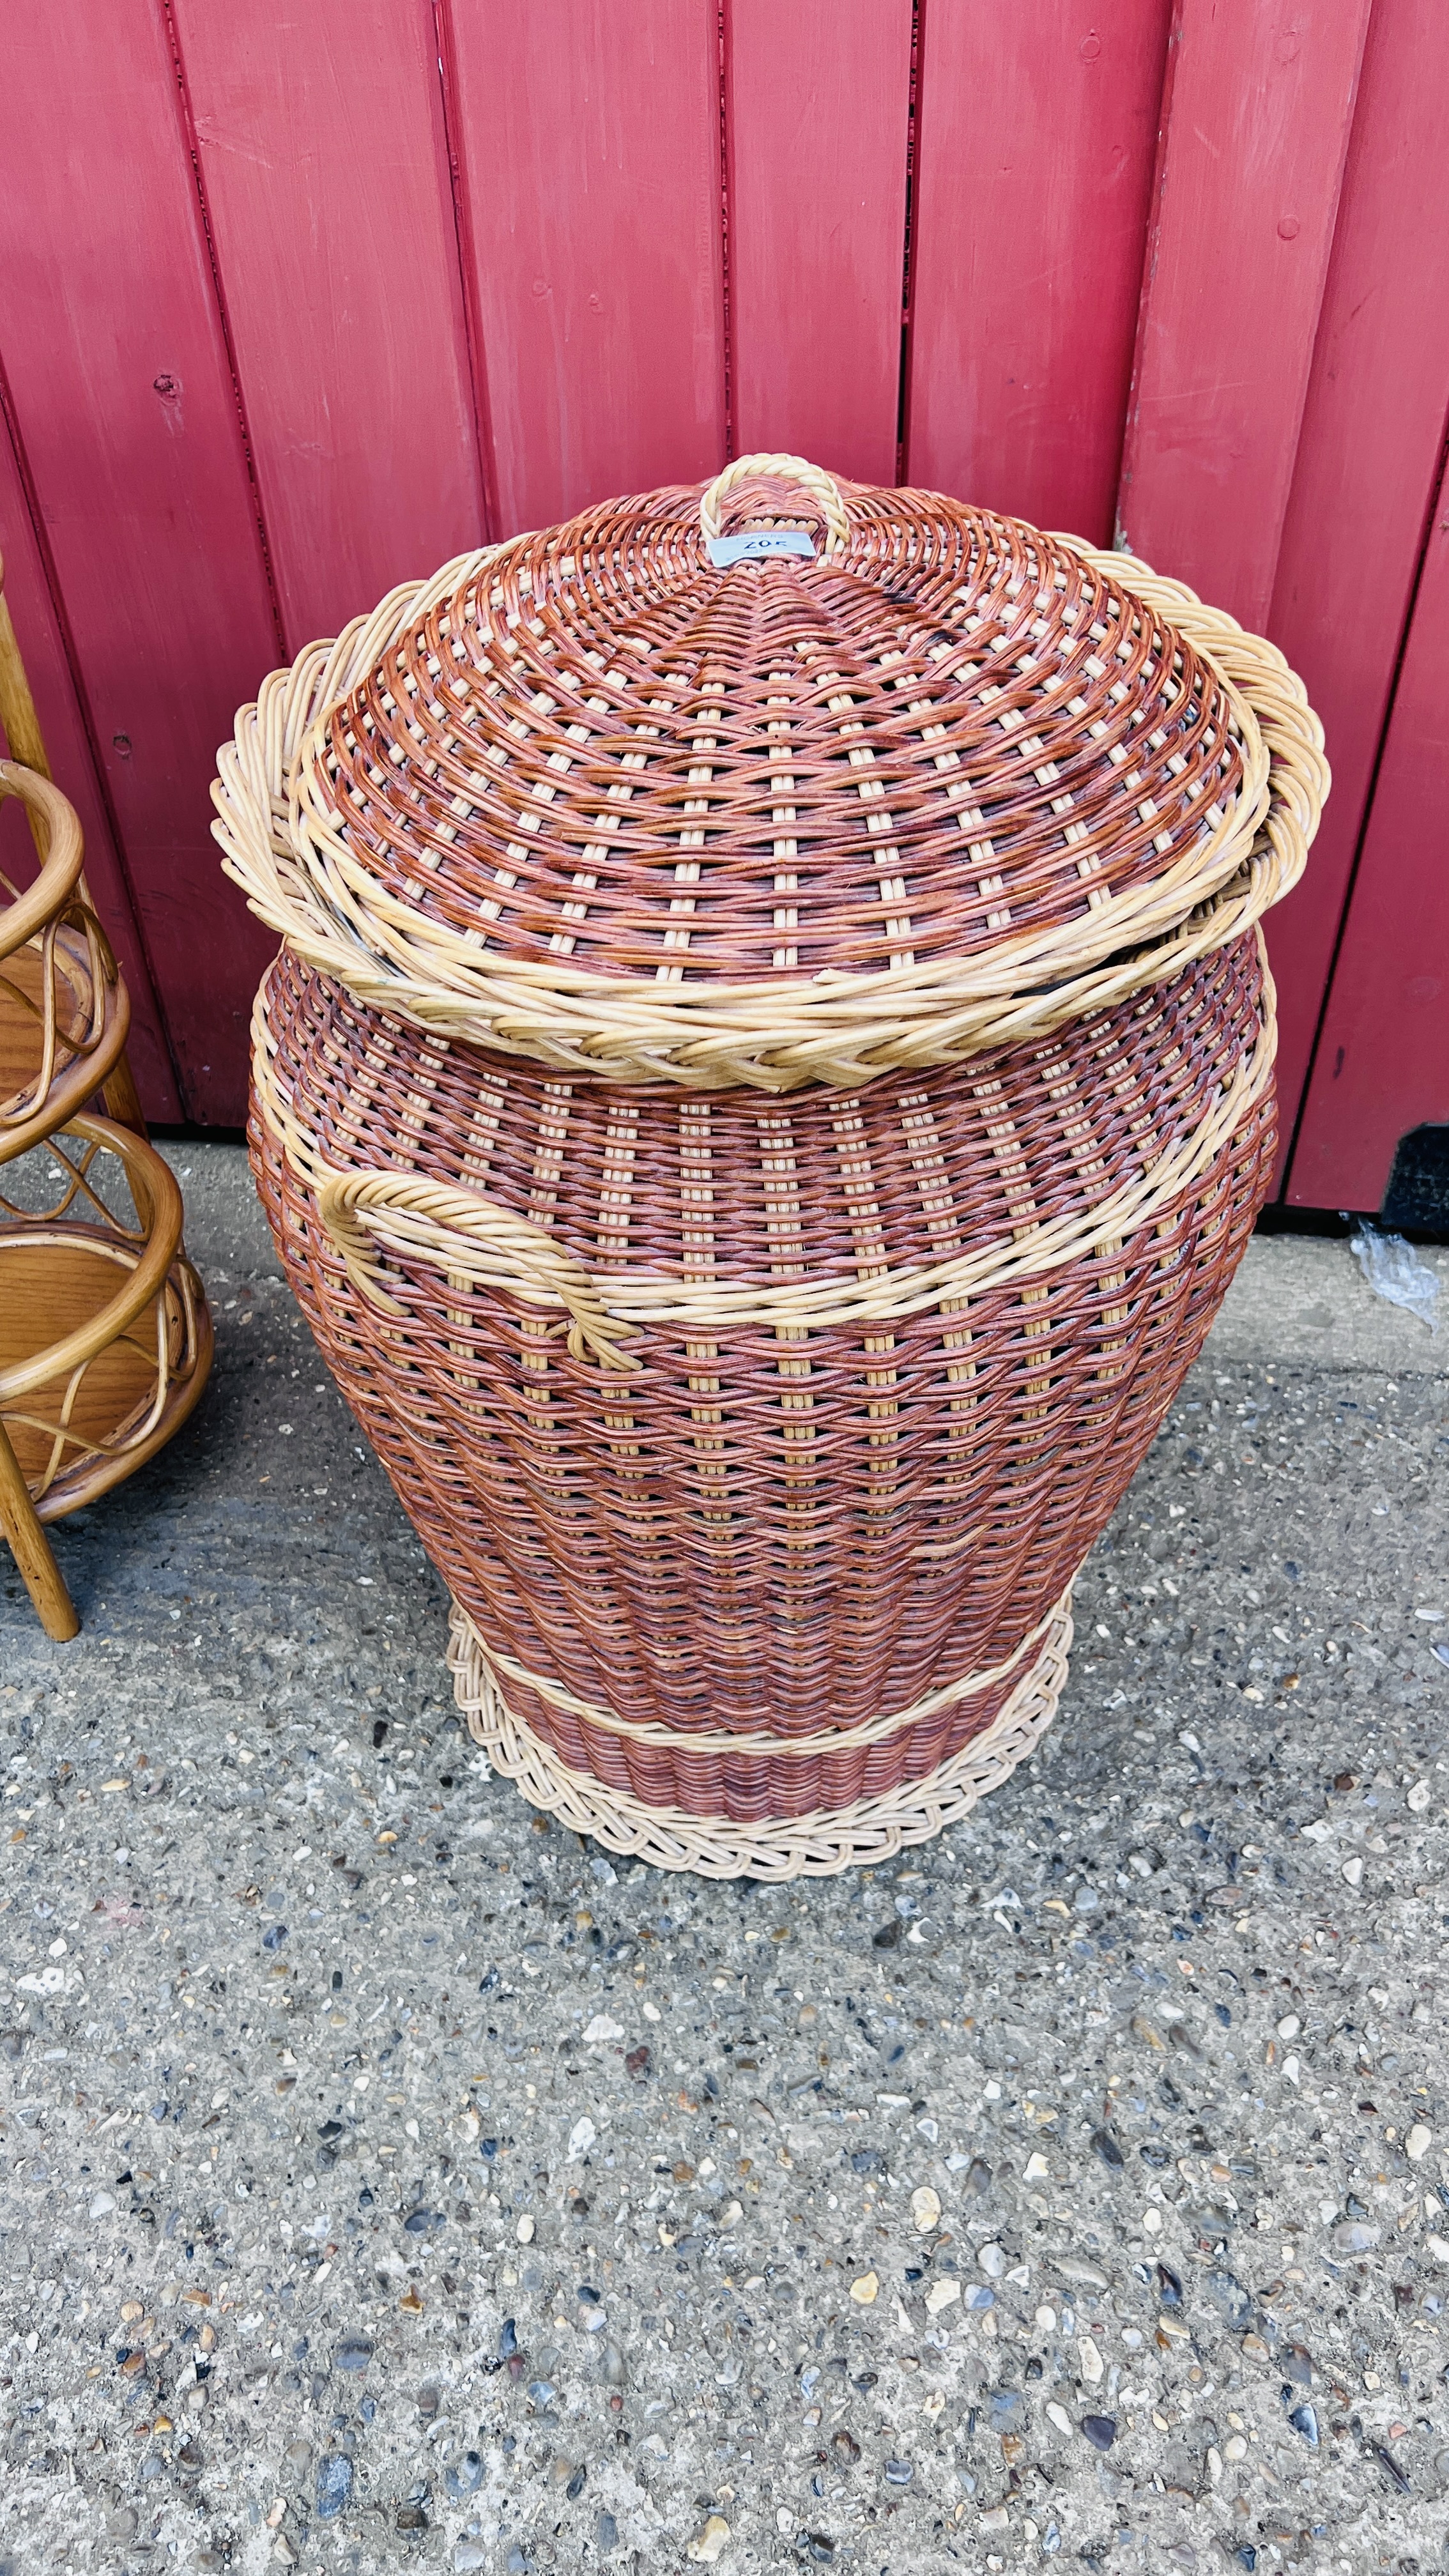 A WOVEN WICKER LAUNDRY BASKET WITH COVER, - Image 2 of 4